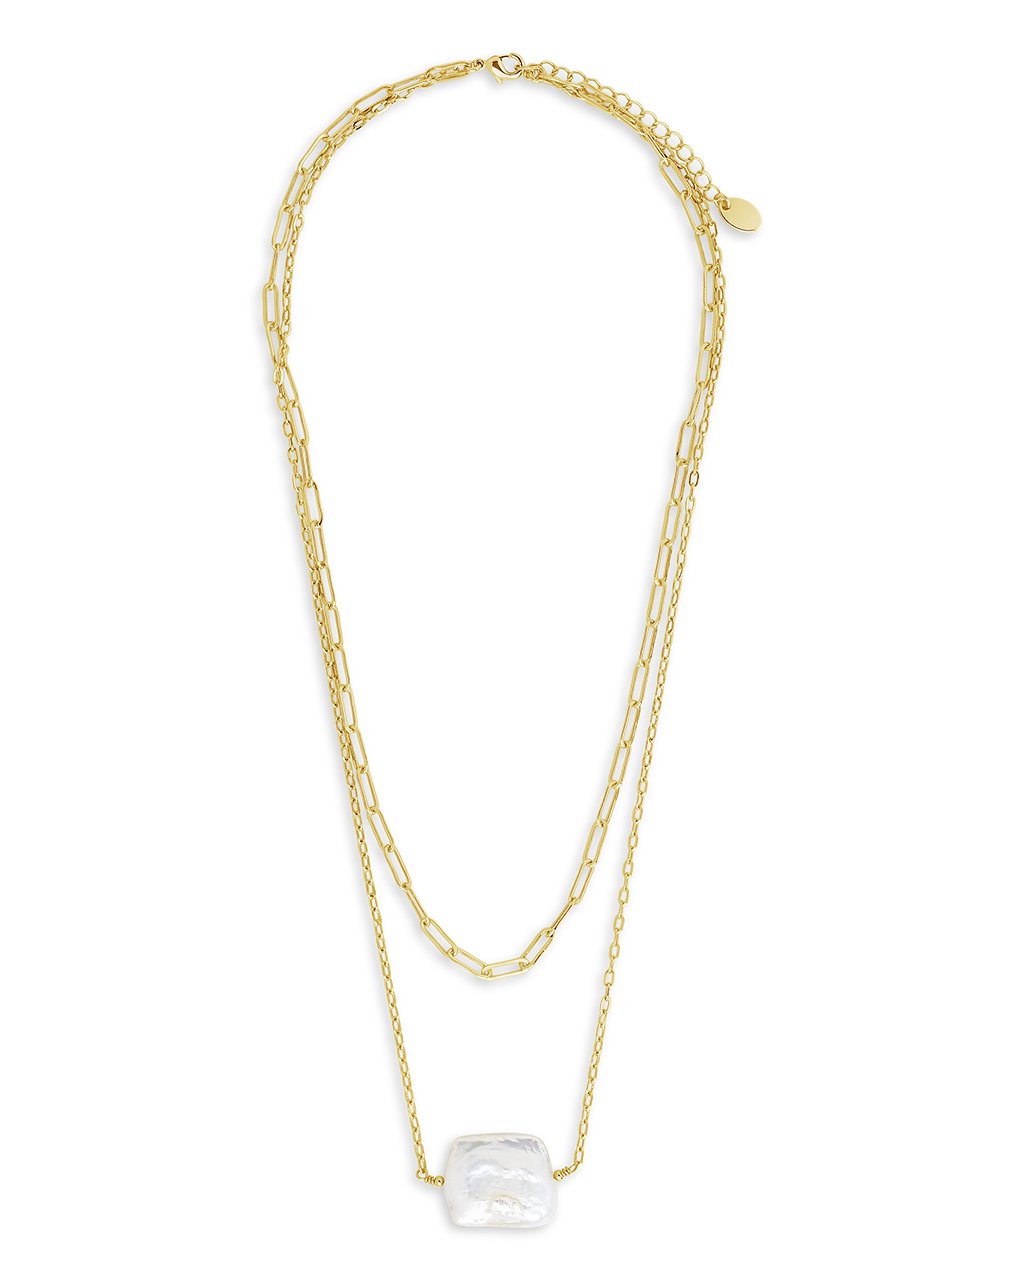 Chain Link and Pearl Layered Necklace - Sterling Forever